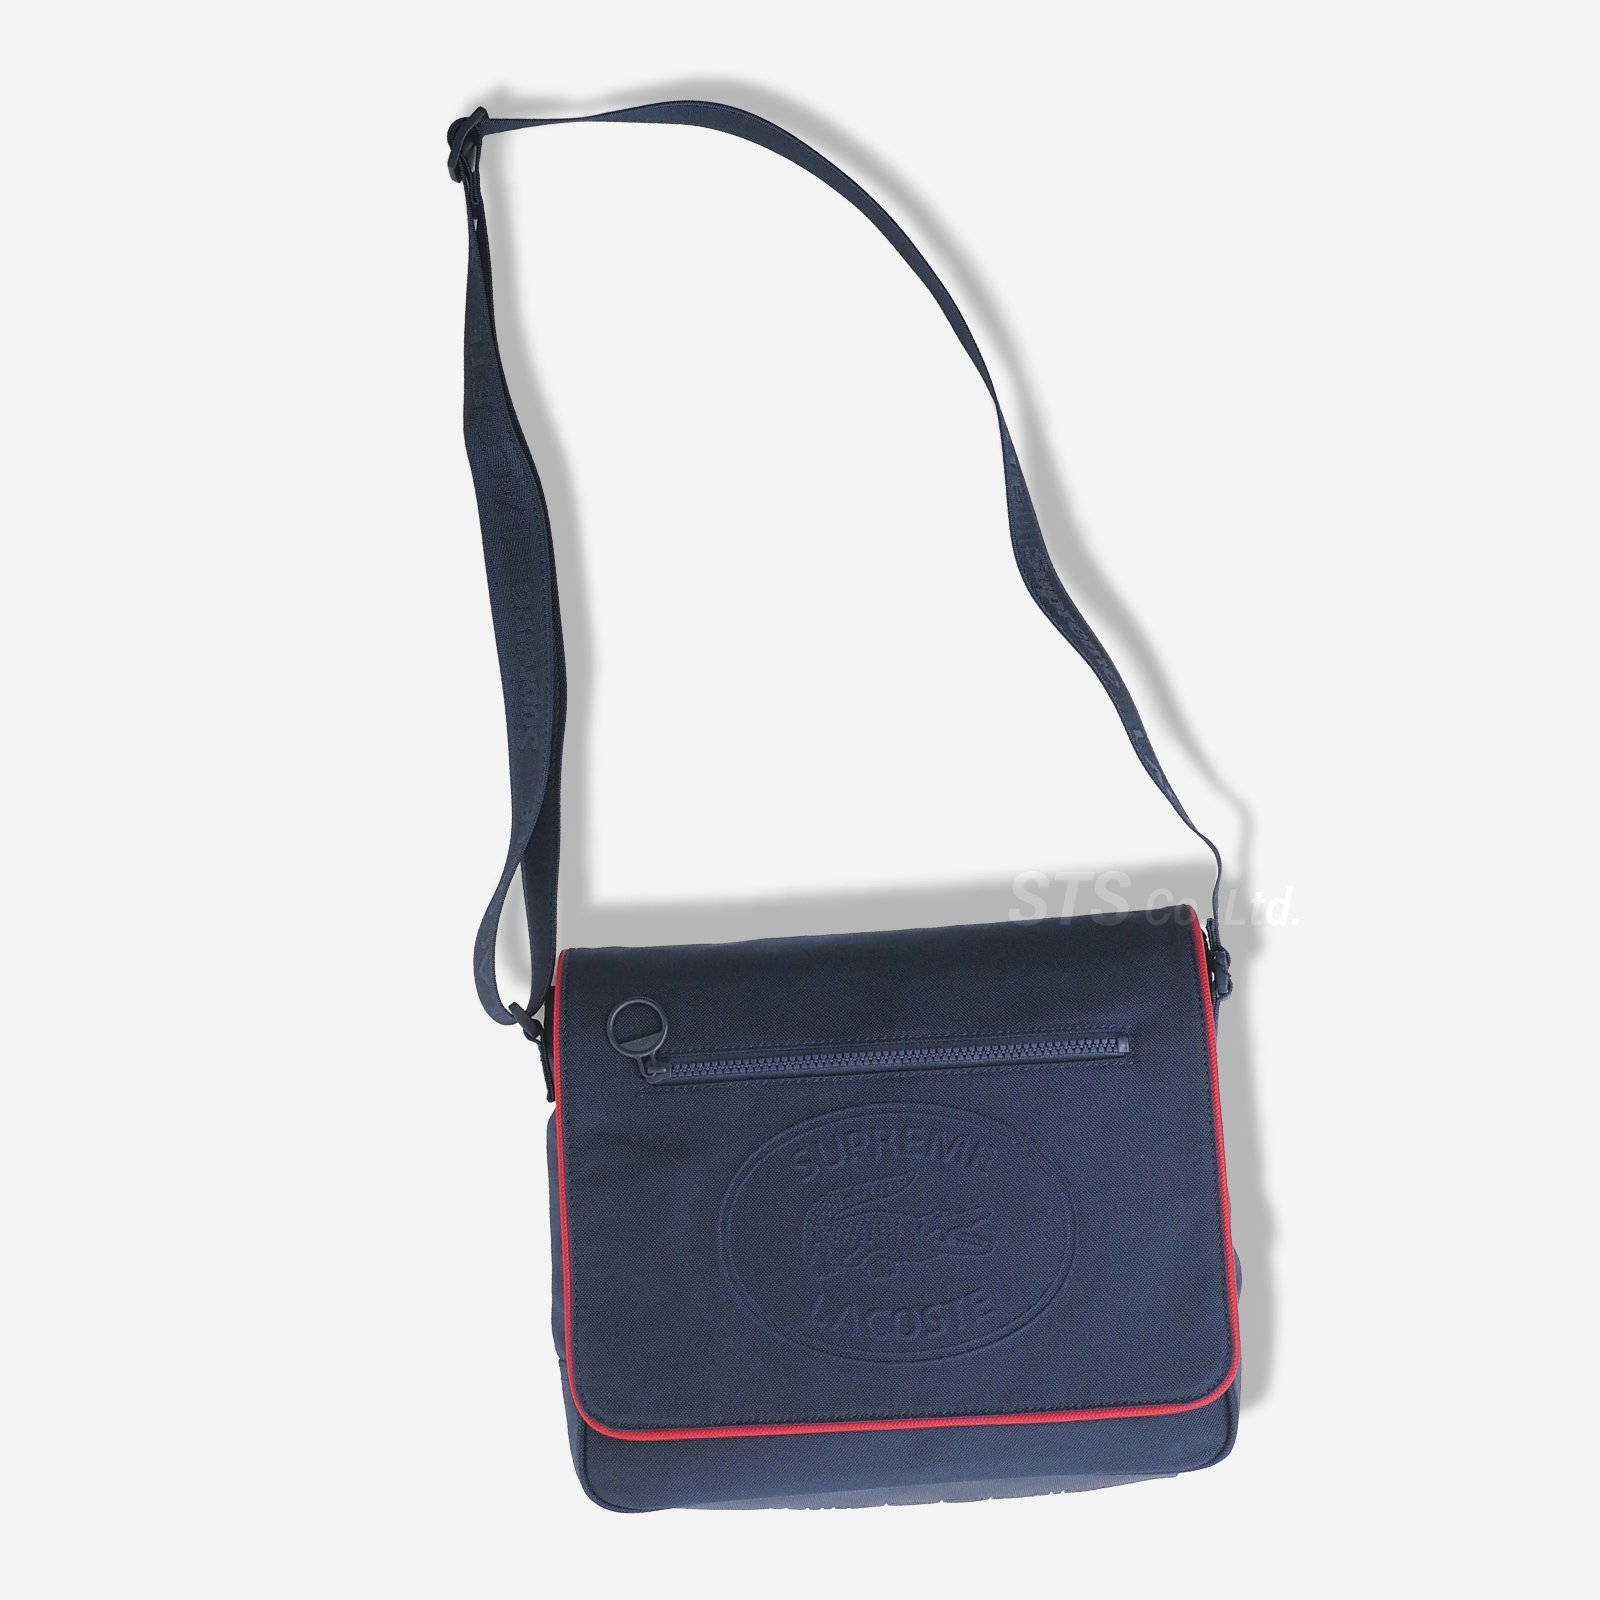 Lacoste Small Messenger Bag navy